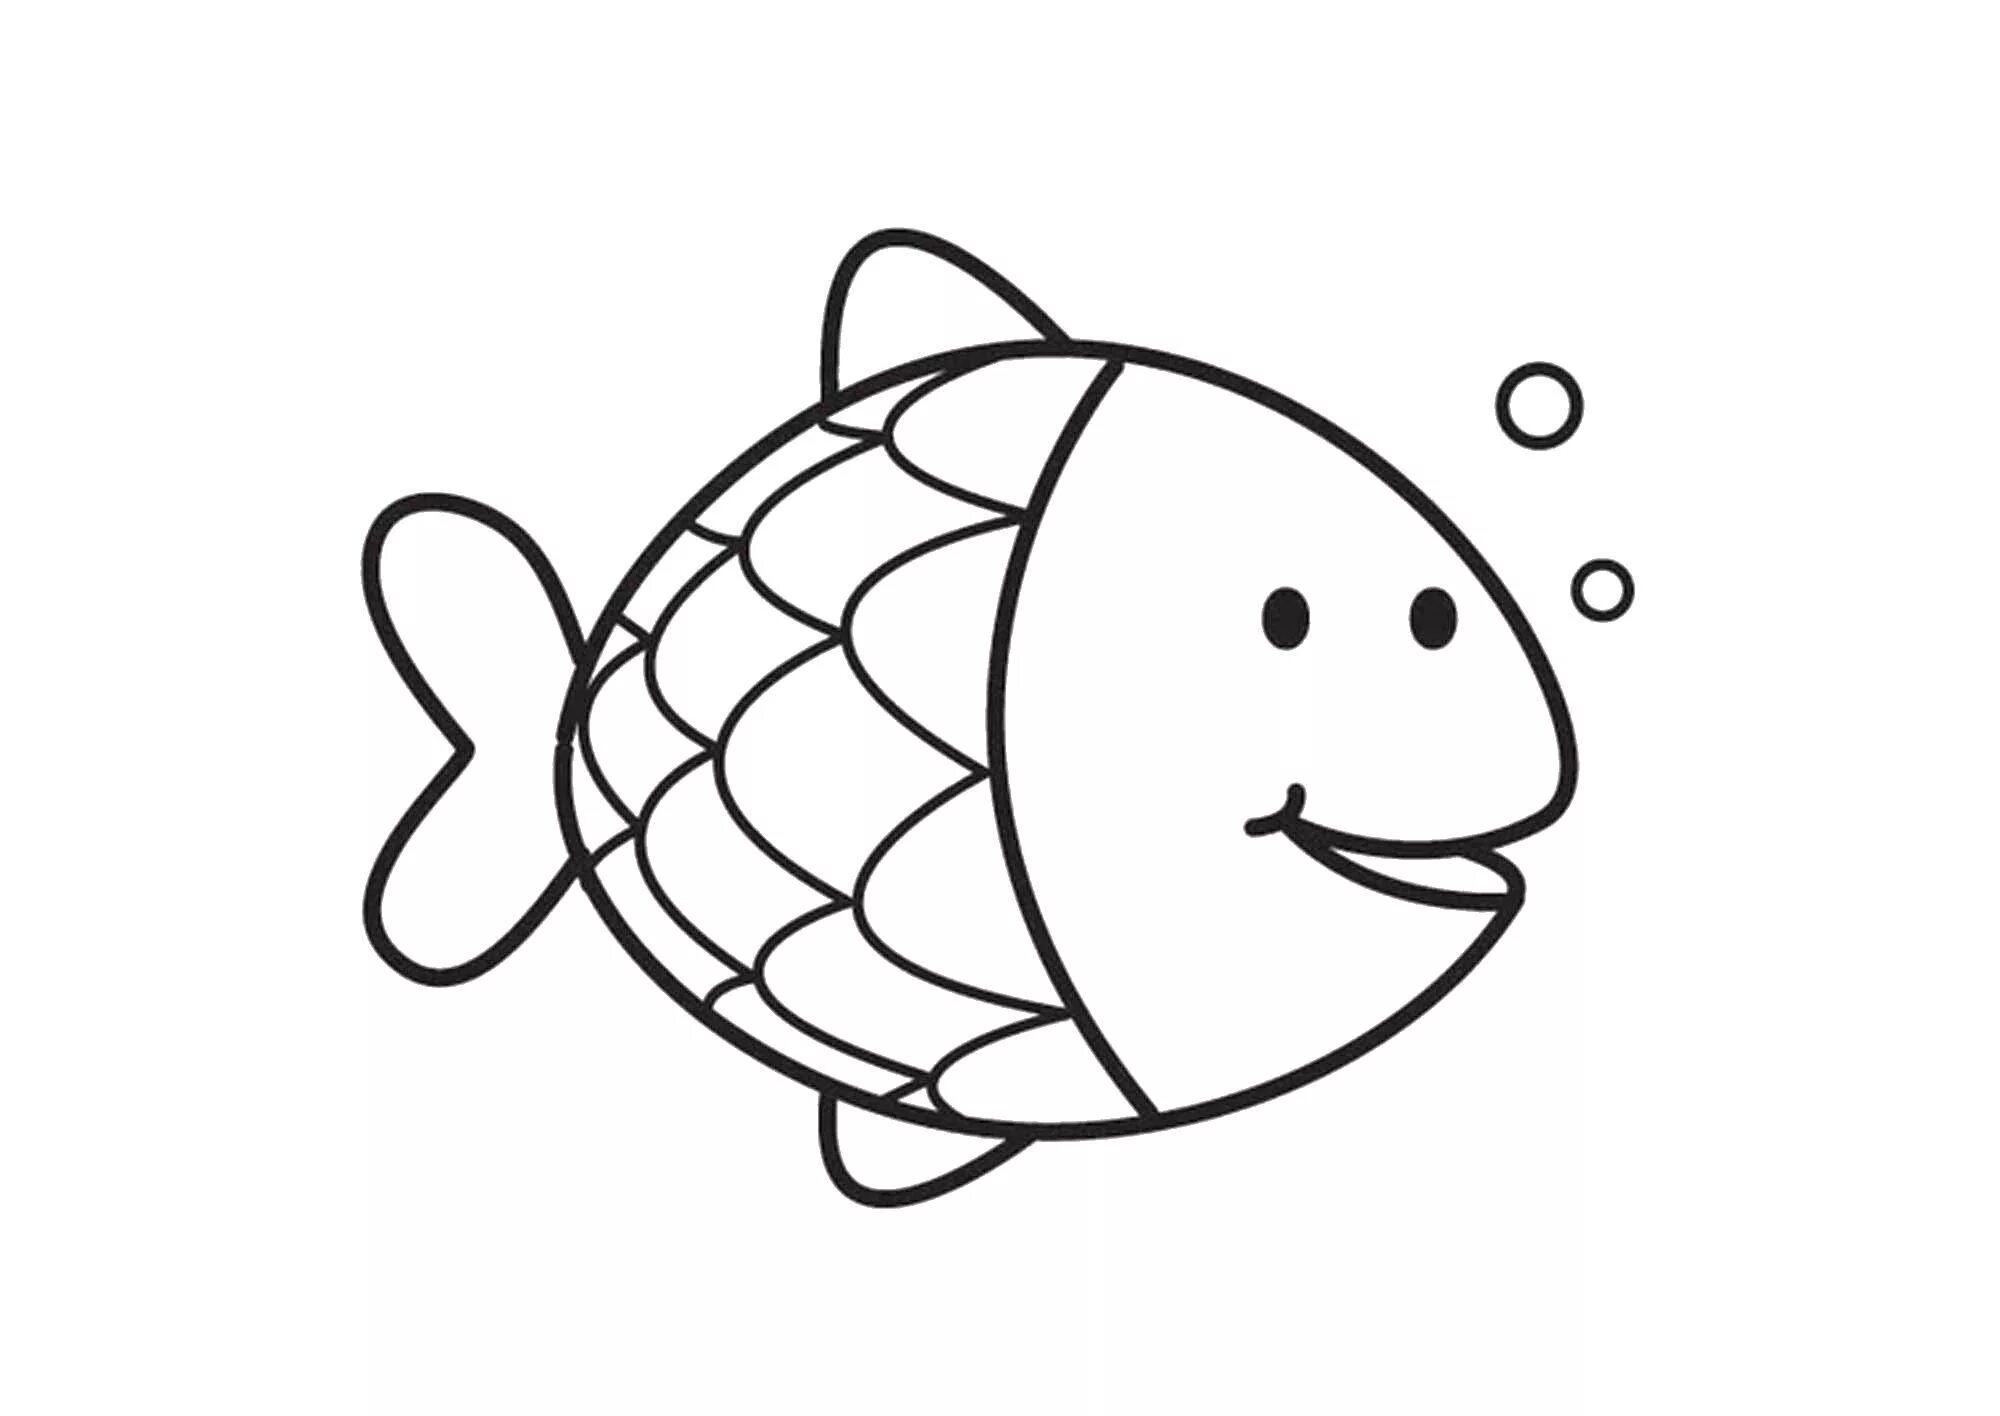 Fish pattern for kids #14